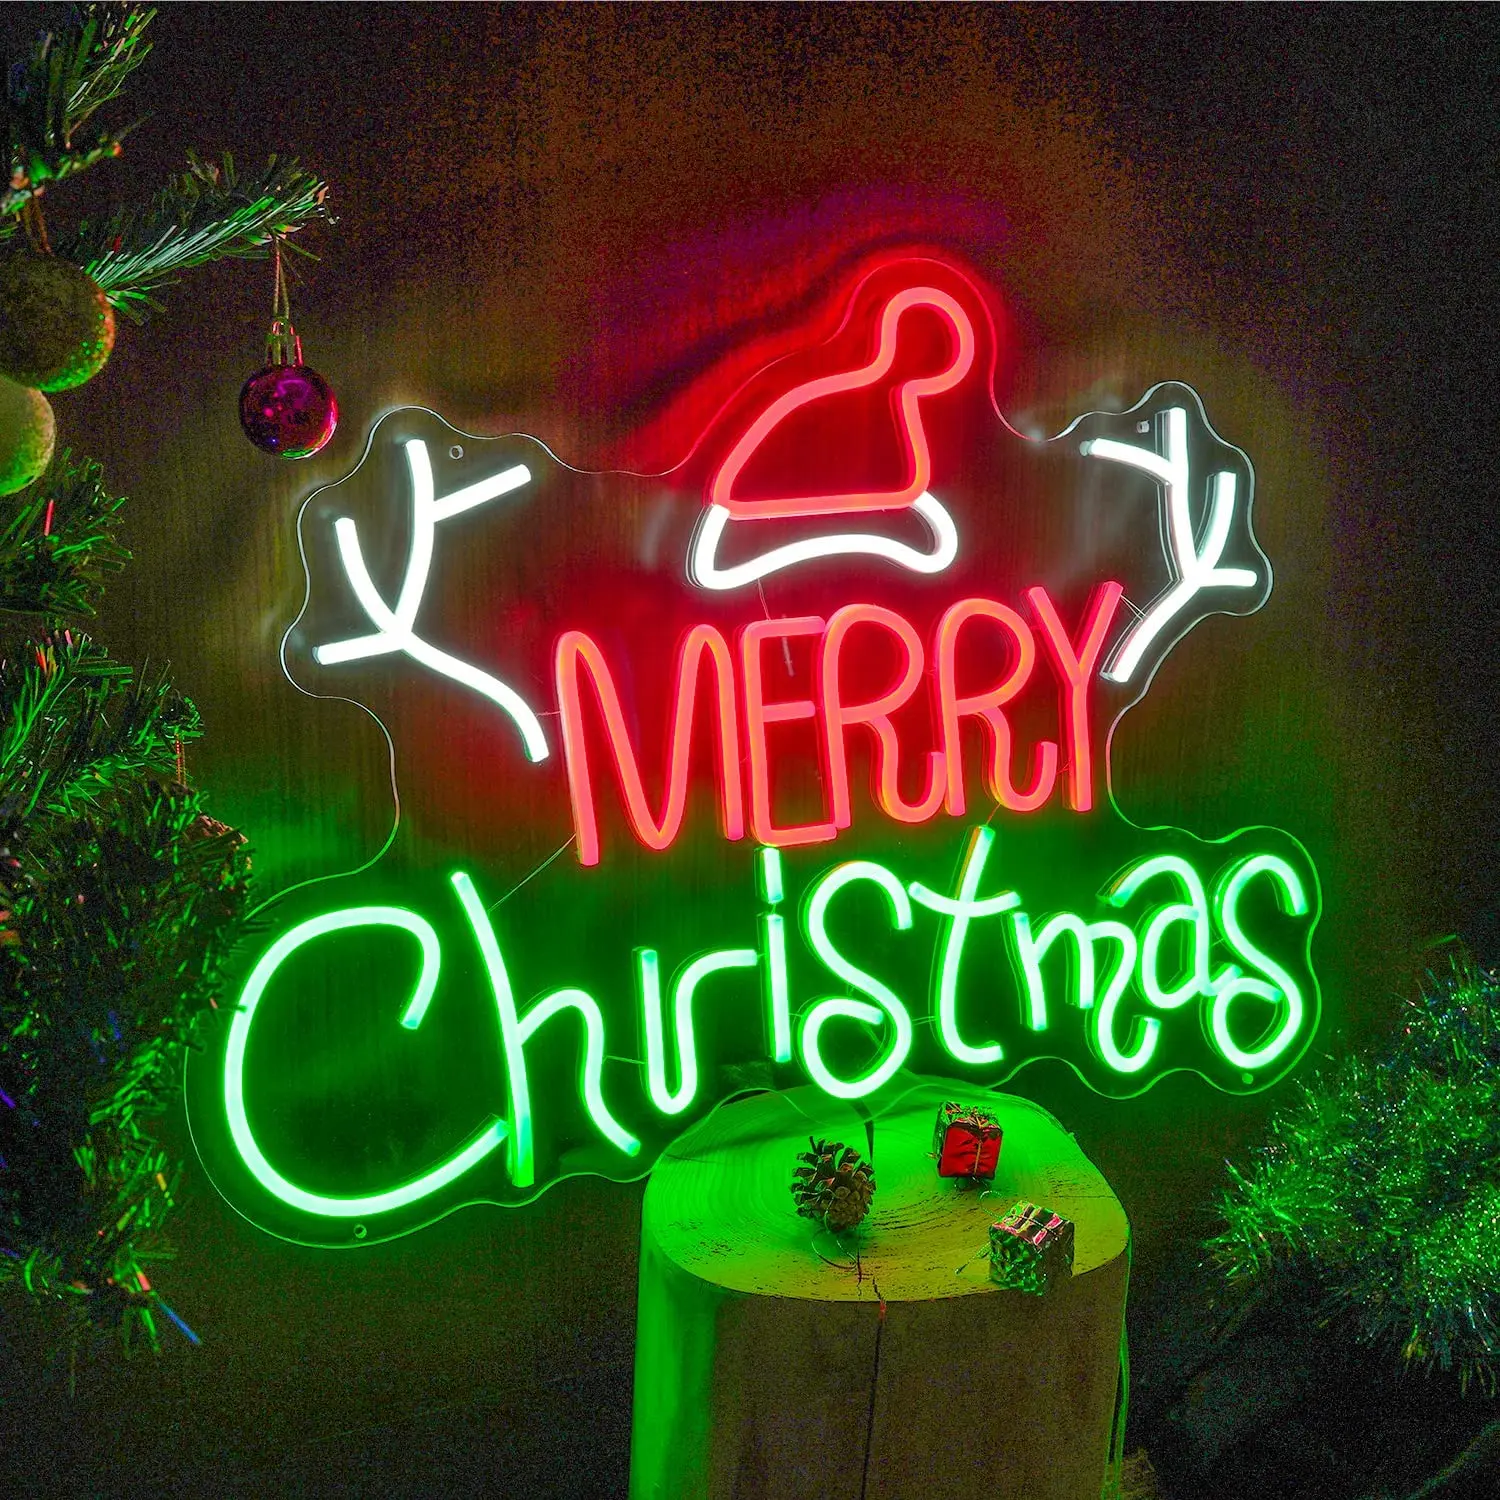 Led Merry Christmas Neon Signs for Bedroom War Decor 12V Christmas Neon Light Sign for Party Christmas Decor Gift